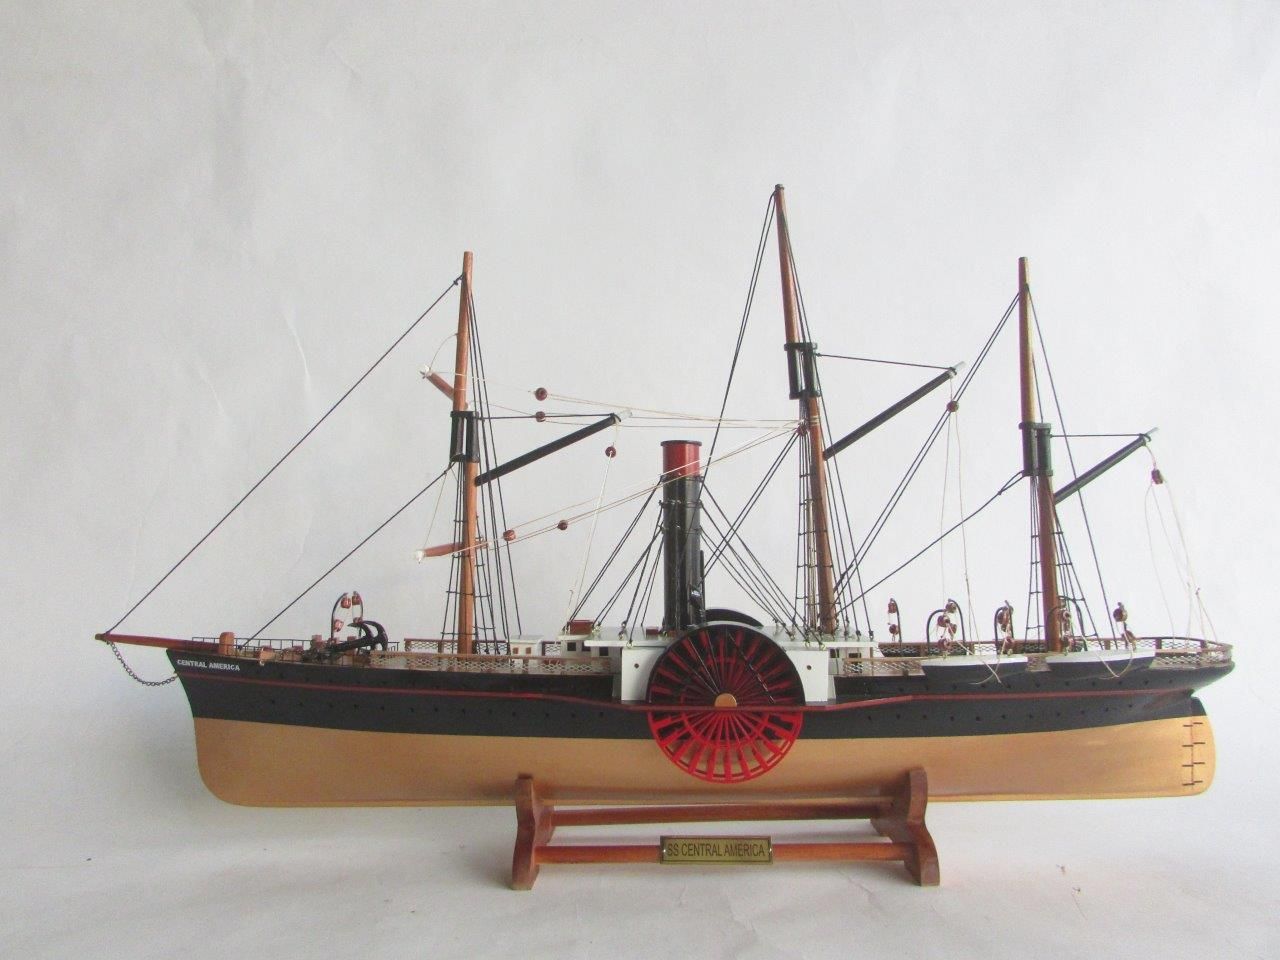 SS Central America wooden model ship